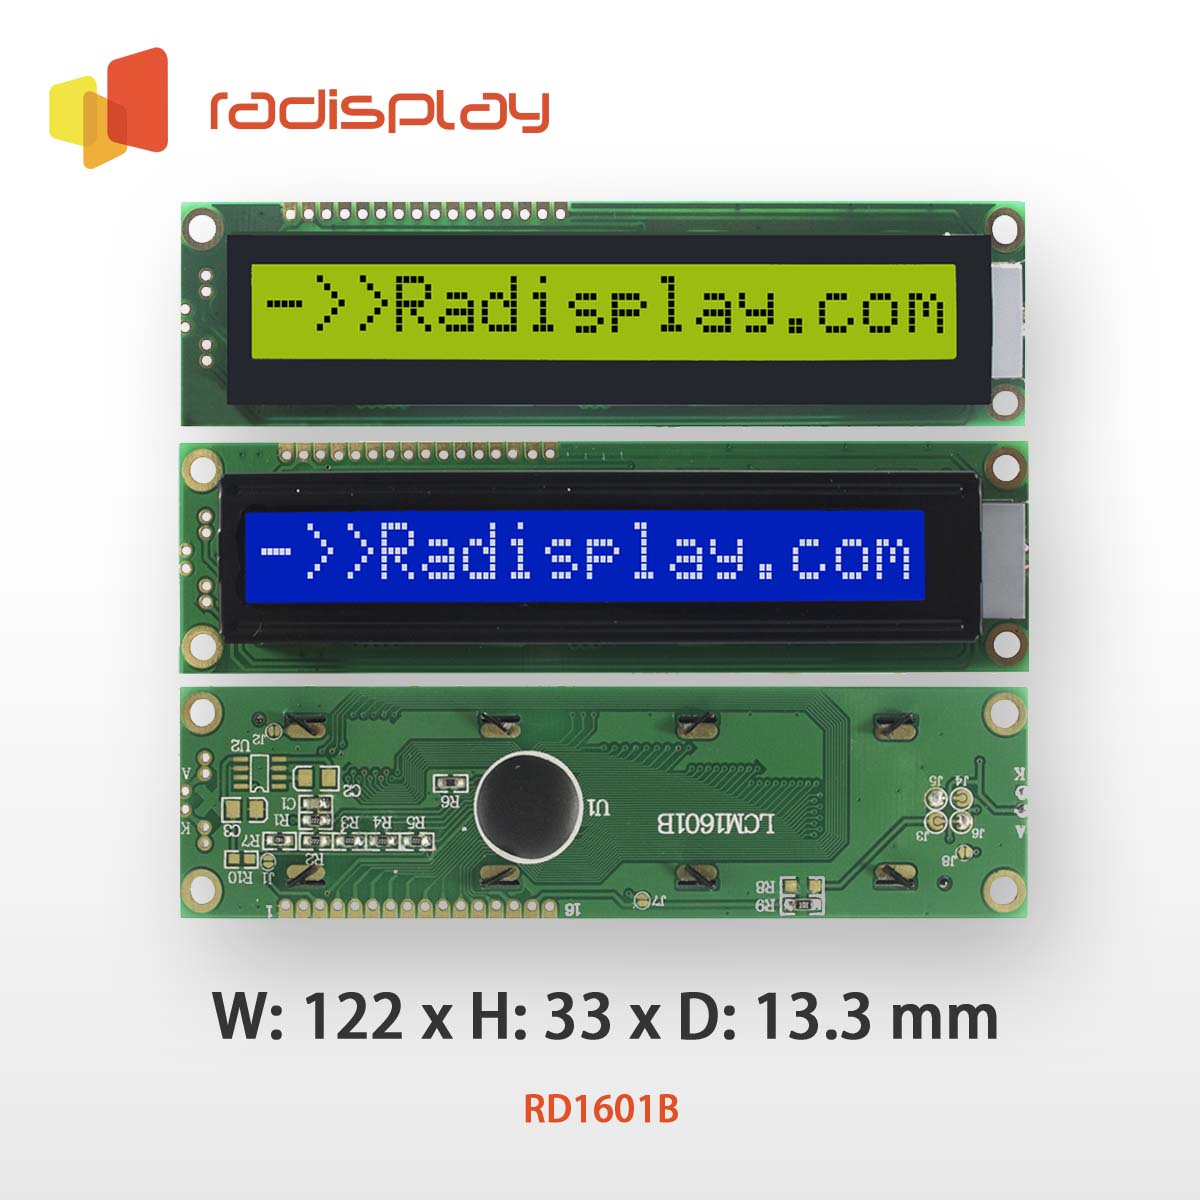 16x1 Character LCD Display Module, Large (RC12864-35)